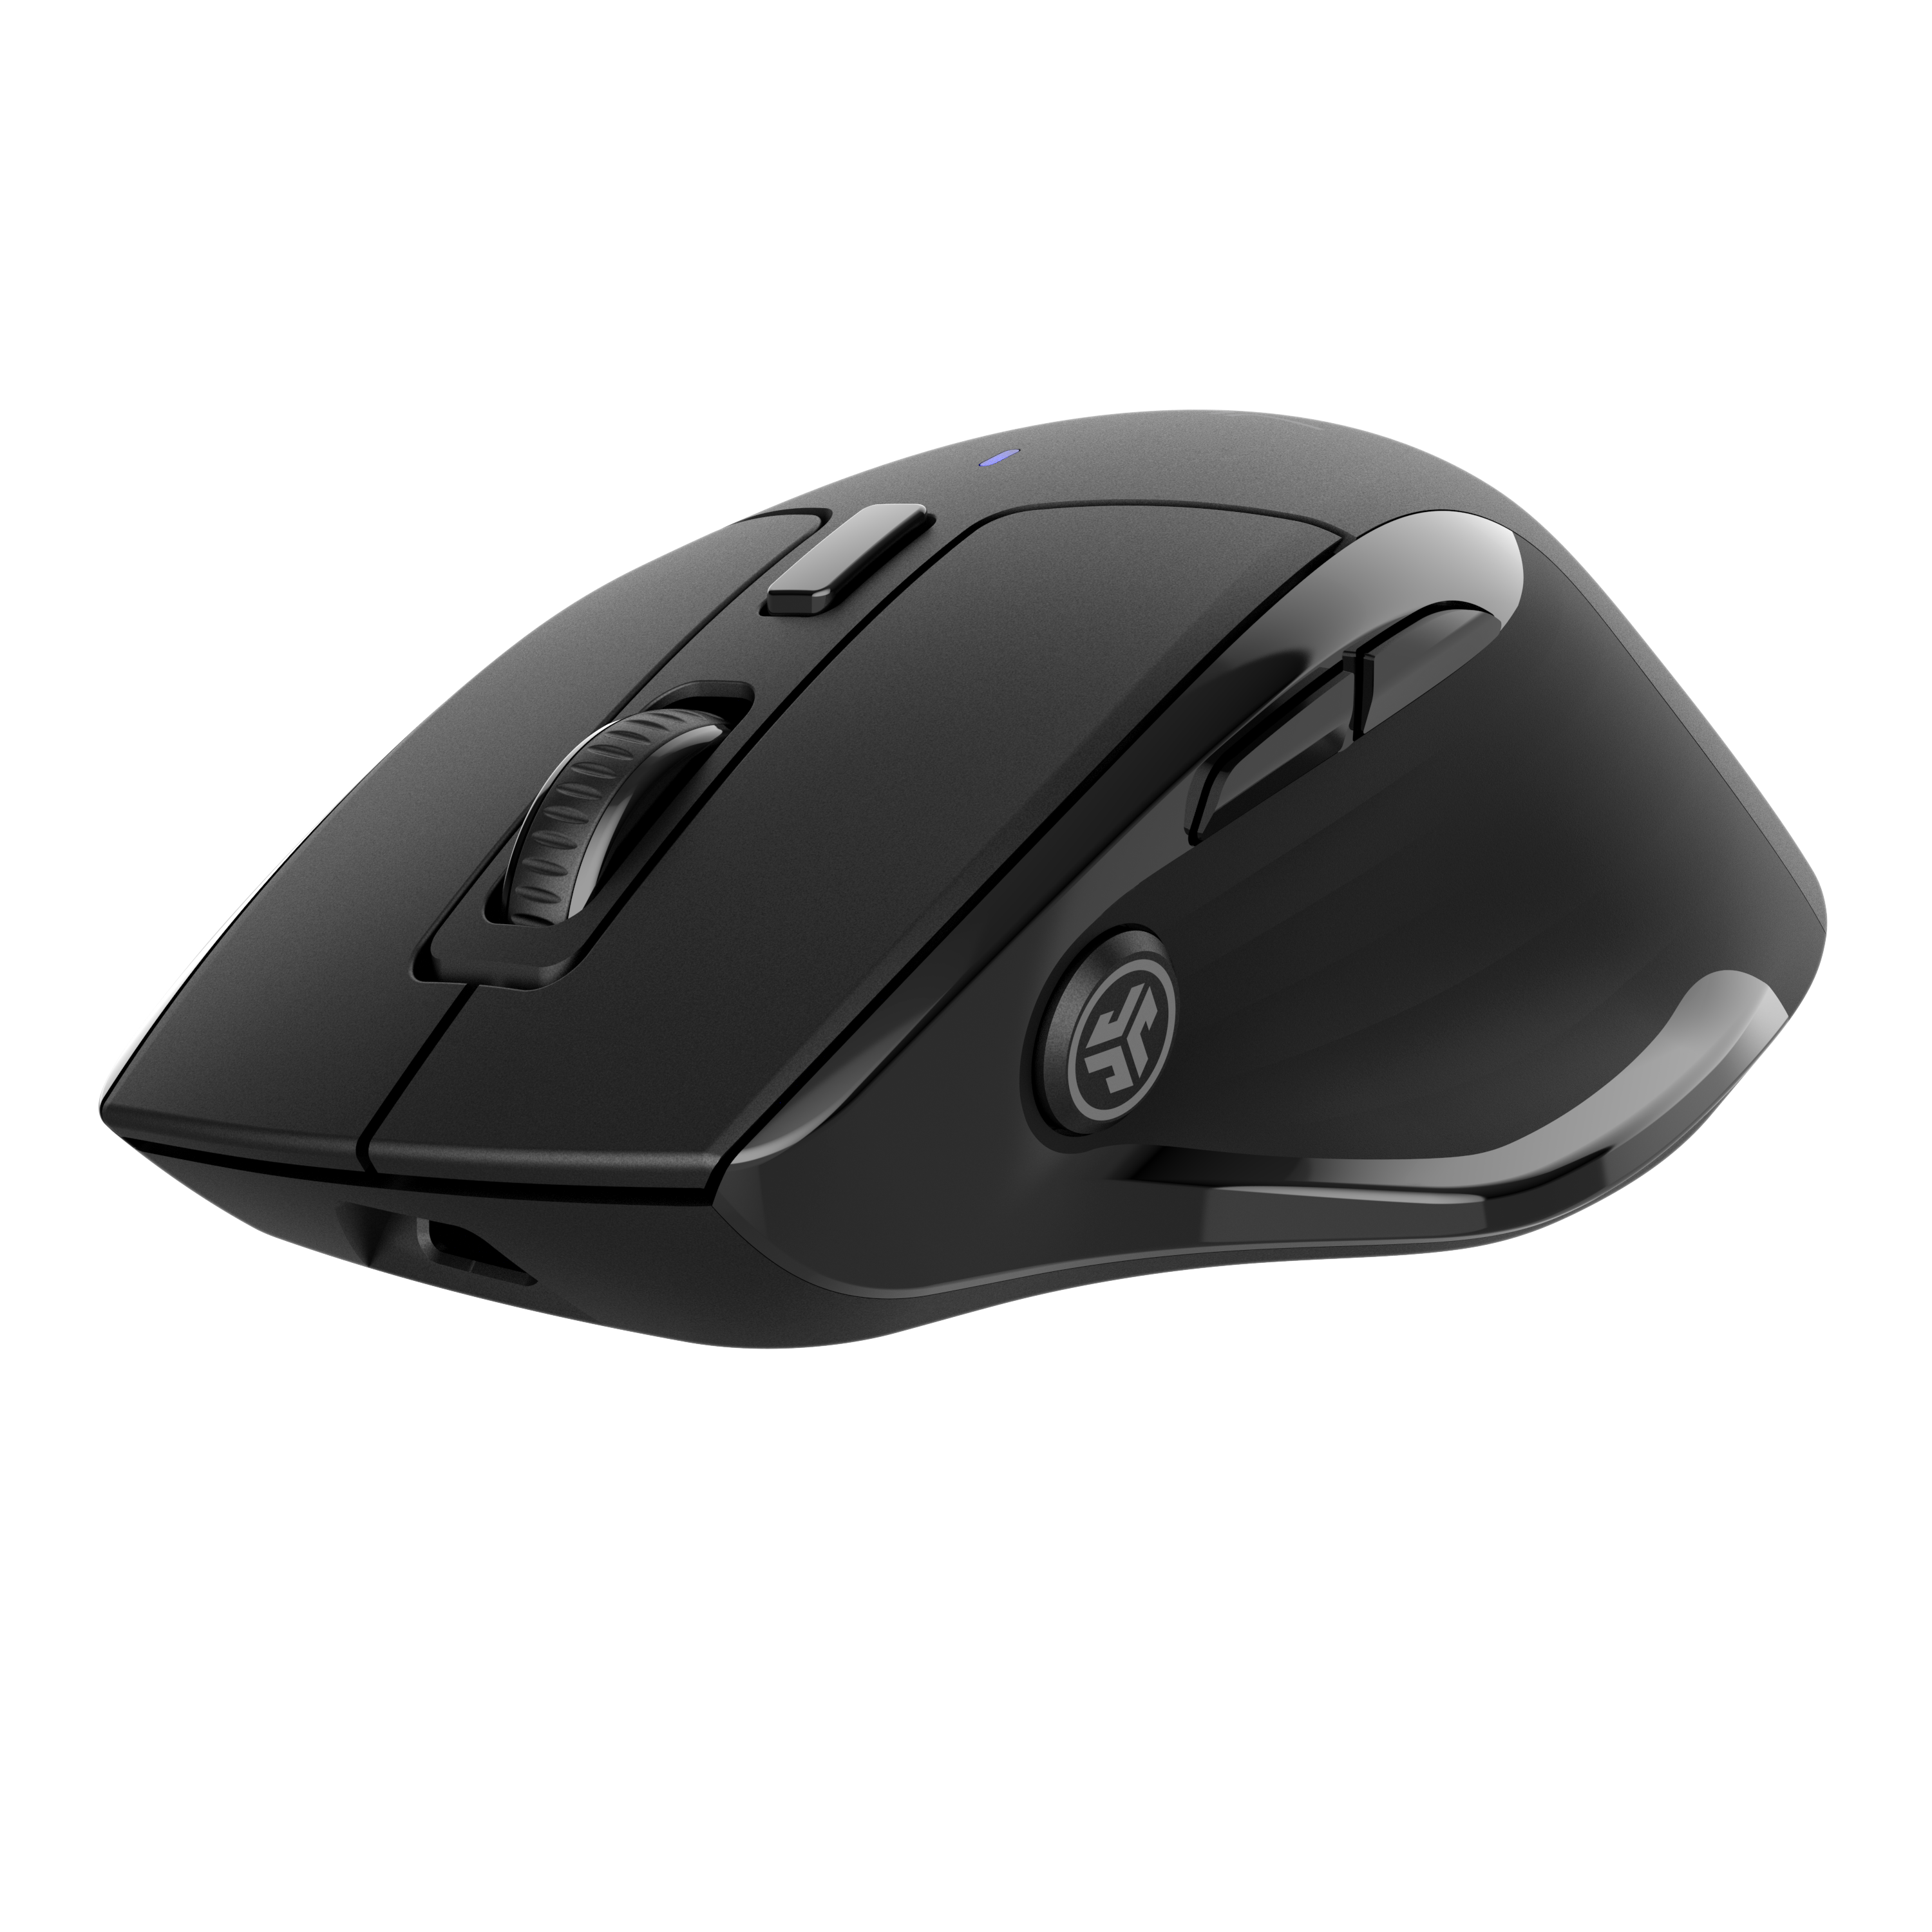 Microsoft Bluetooth Mouse - Black. Comfortable design, Right/Left Hand Use,  4-Way Scroll Wheel, Wireless Bluetooth Mouse for PC/Laptop/Desktop, works